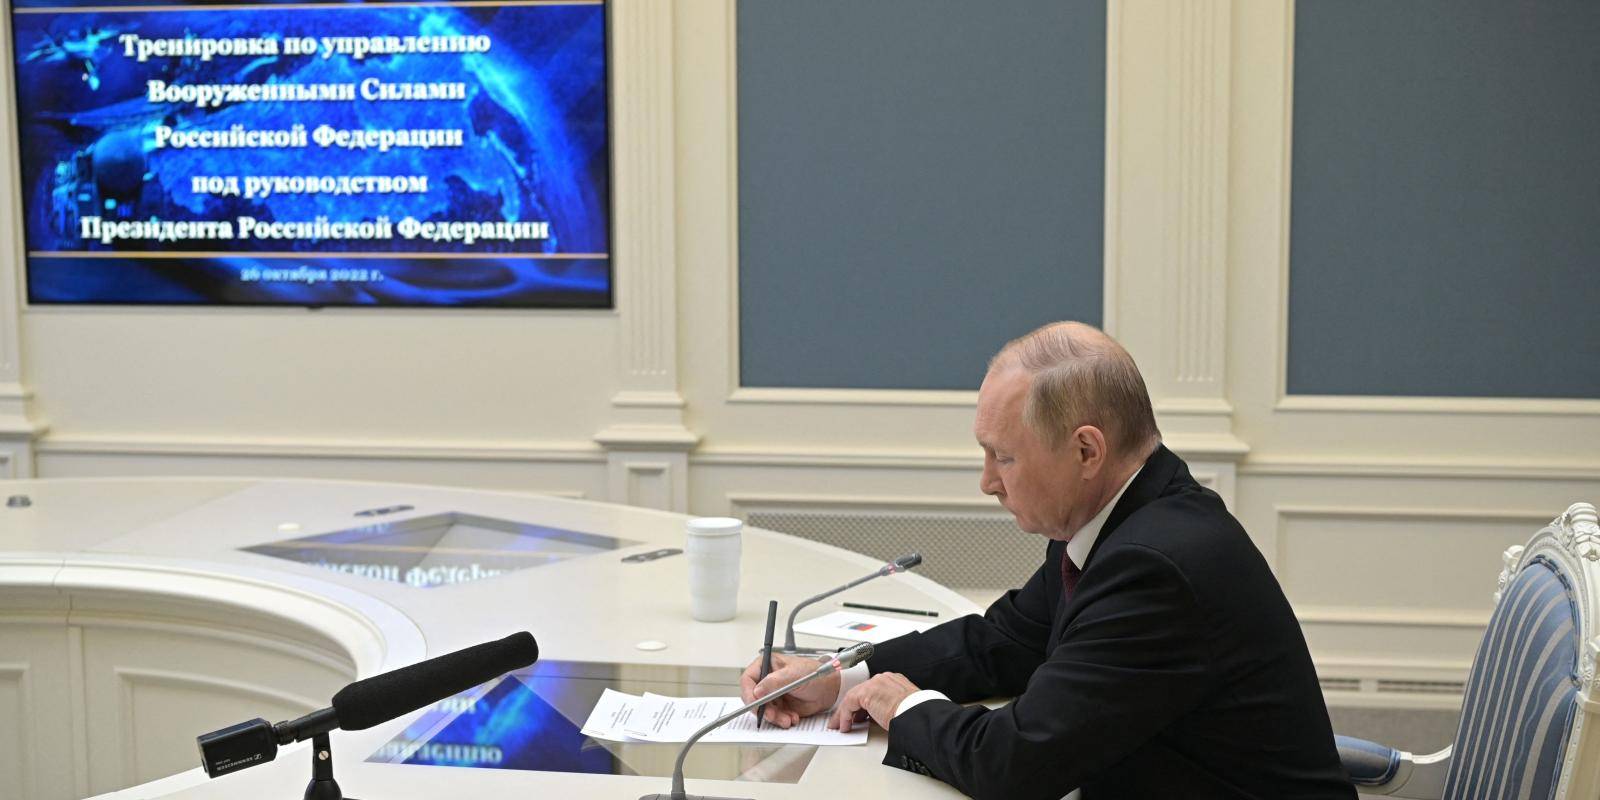 Russian president Vladimir Putin sits at a light-coloured desk writing while a wall-mounted video screen shows a link to a military training exercise